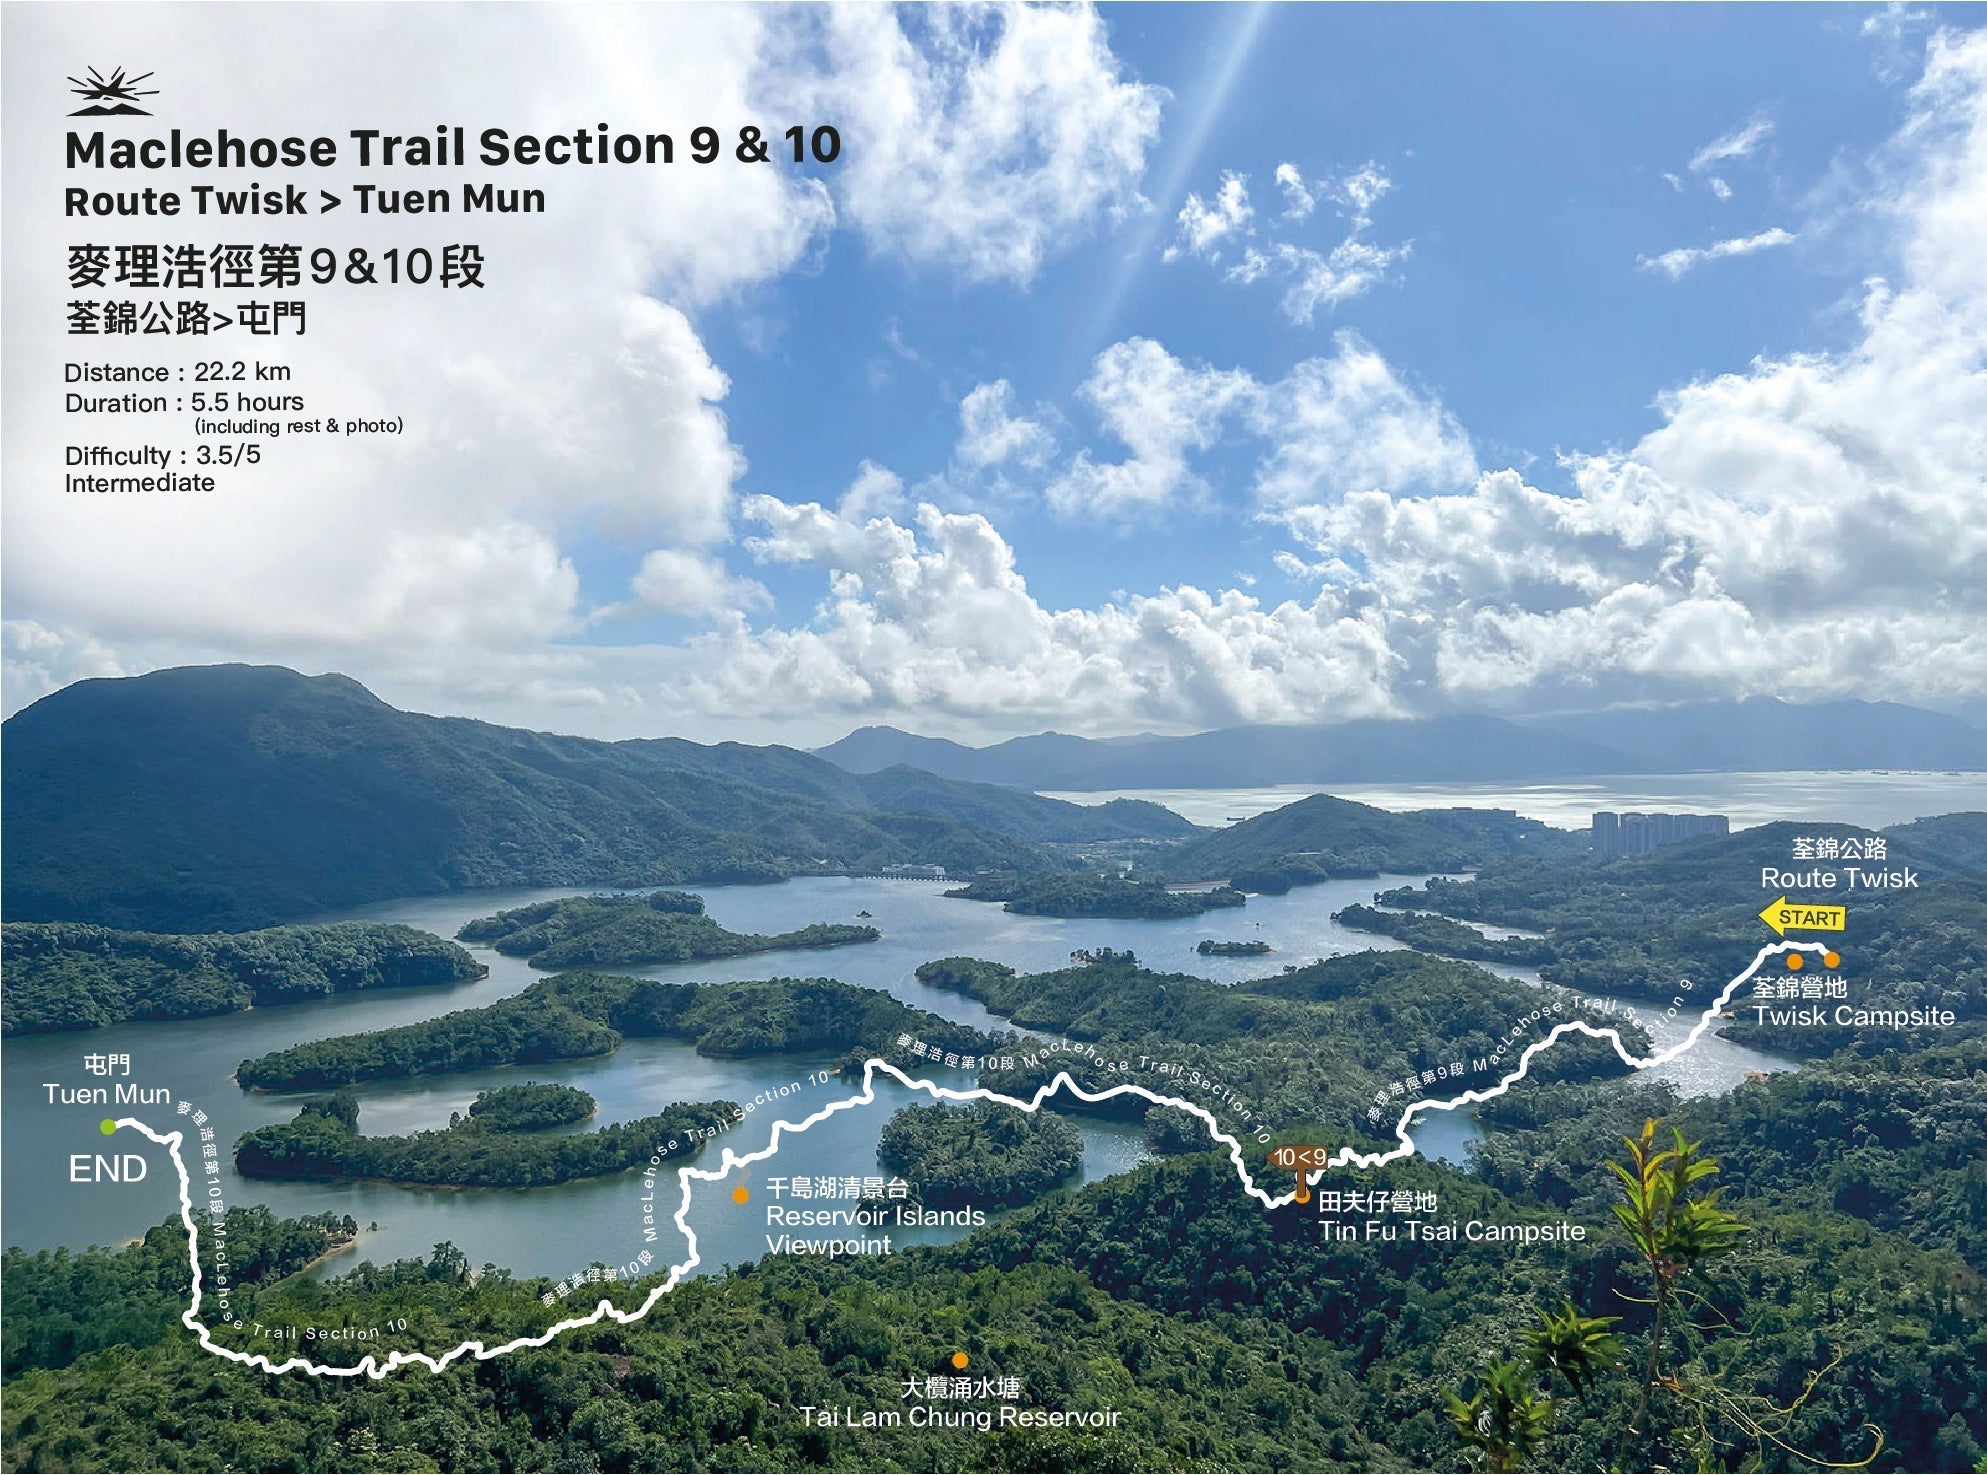 MacLehose Trail Section 9&10 | Route Twisk toTuen Mun